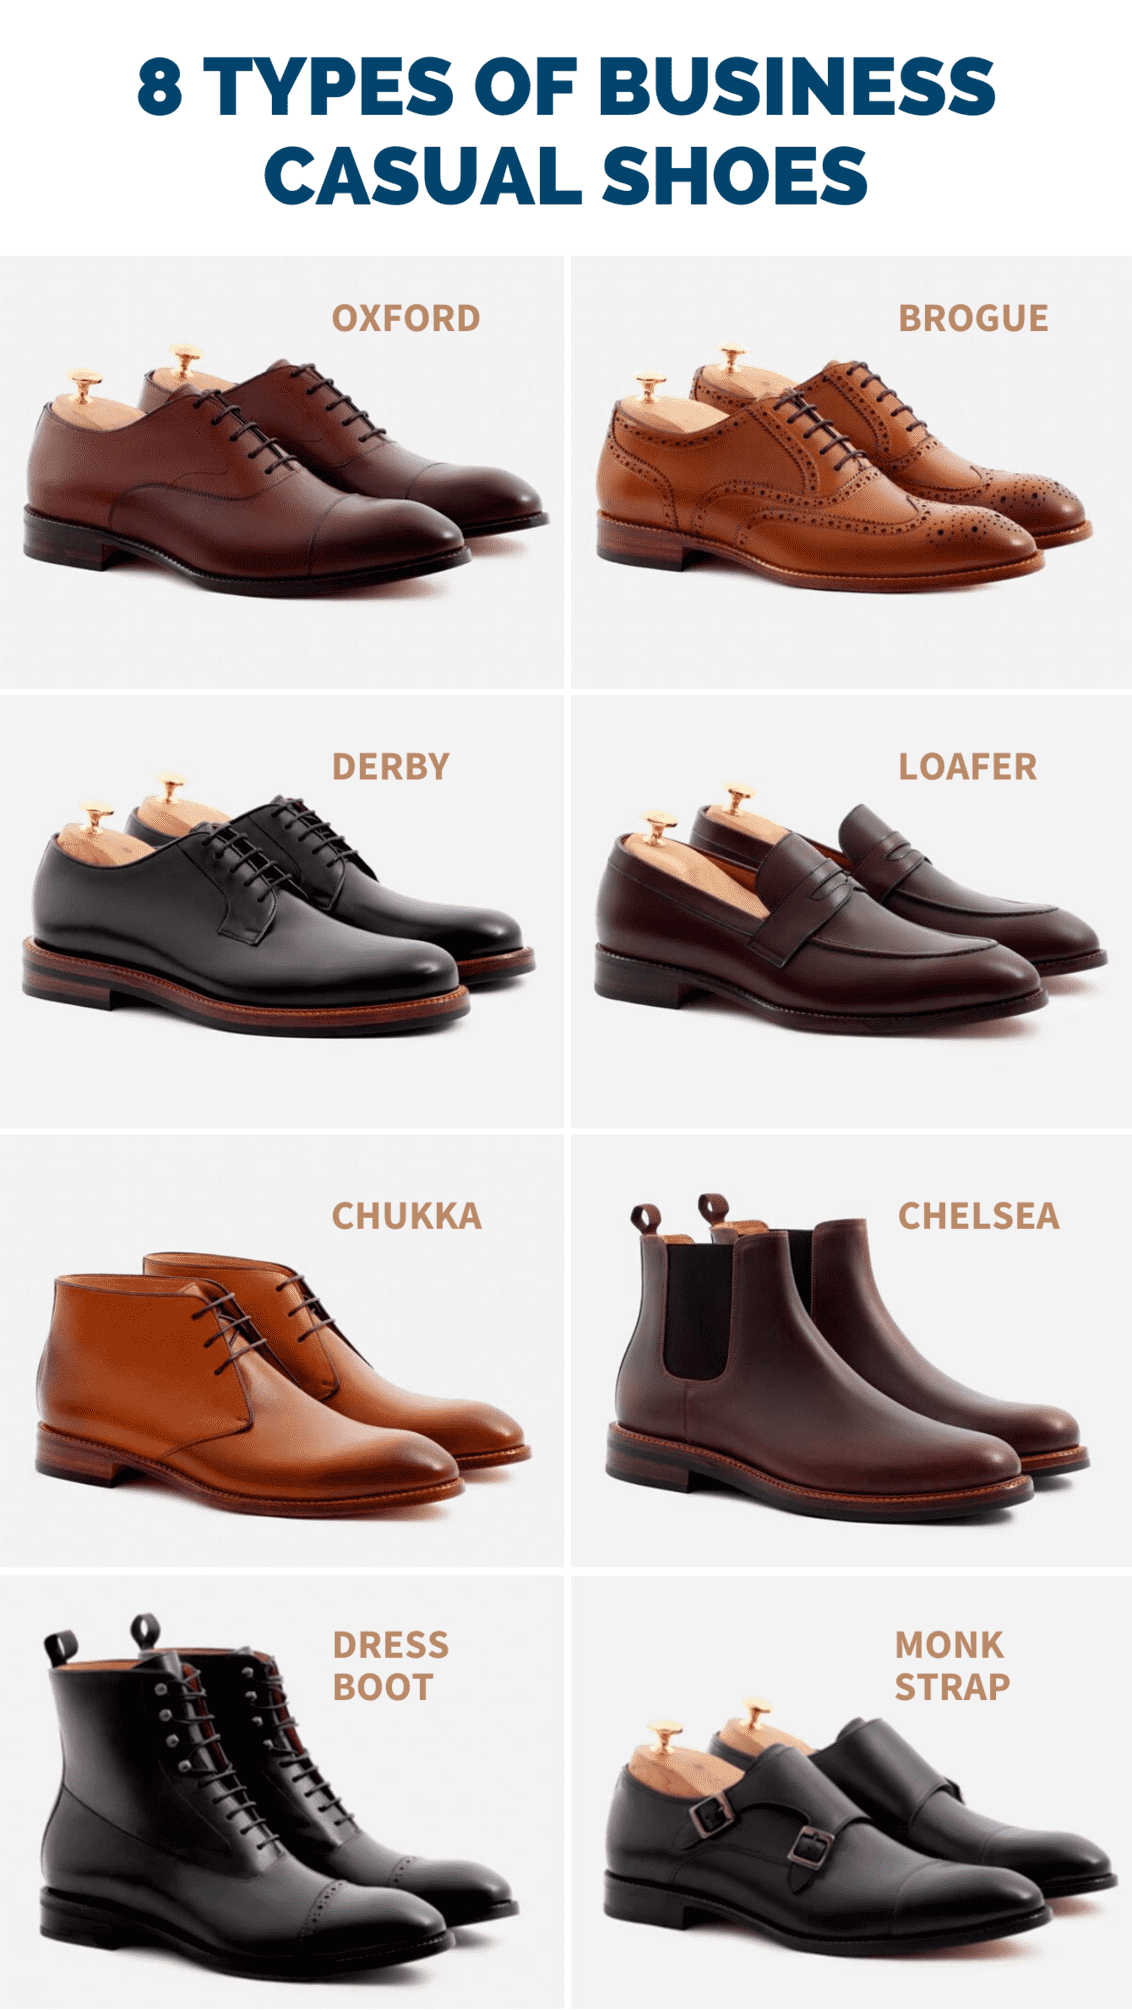 Say aside most Cathedral Smart Casual Dress Shoes Greece, SAVE 43% - aveclumiere.com